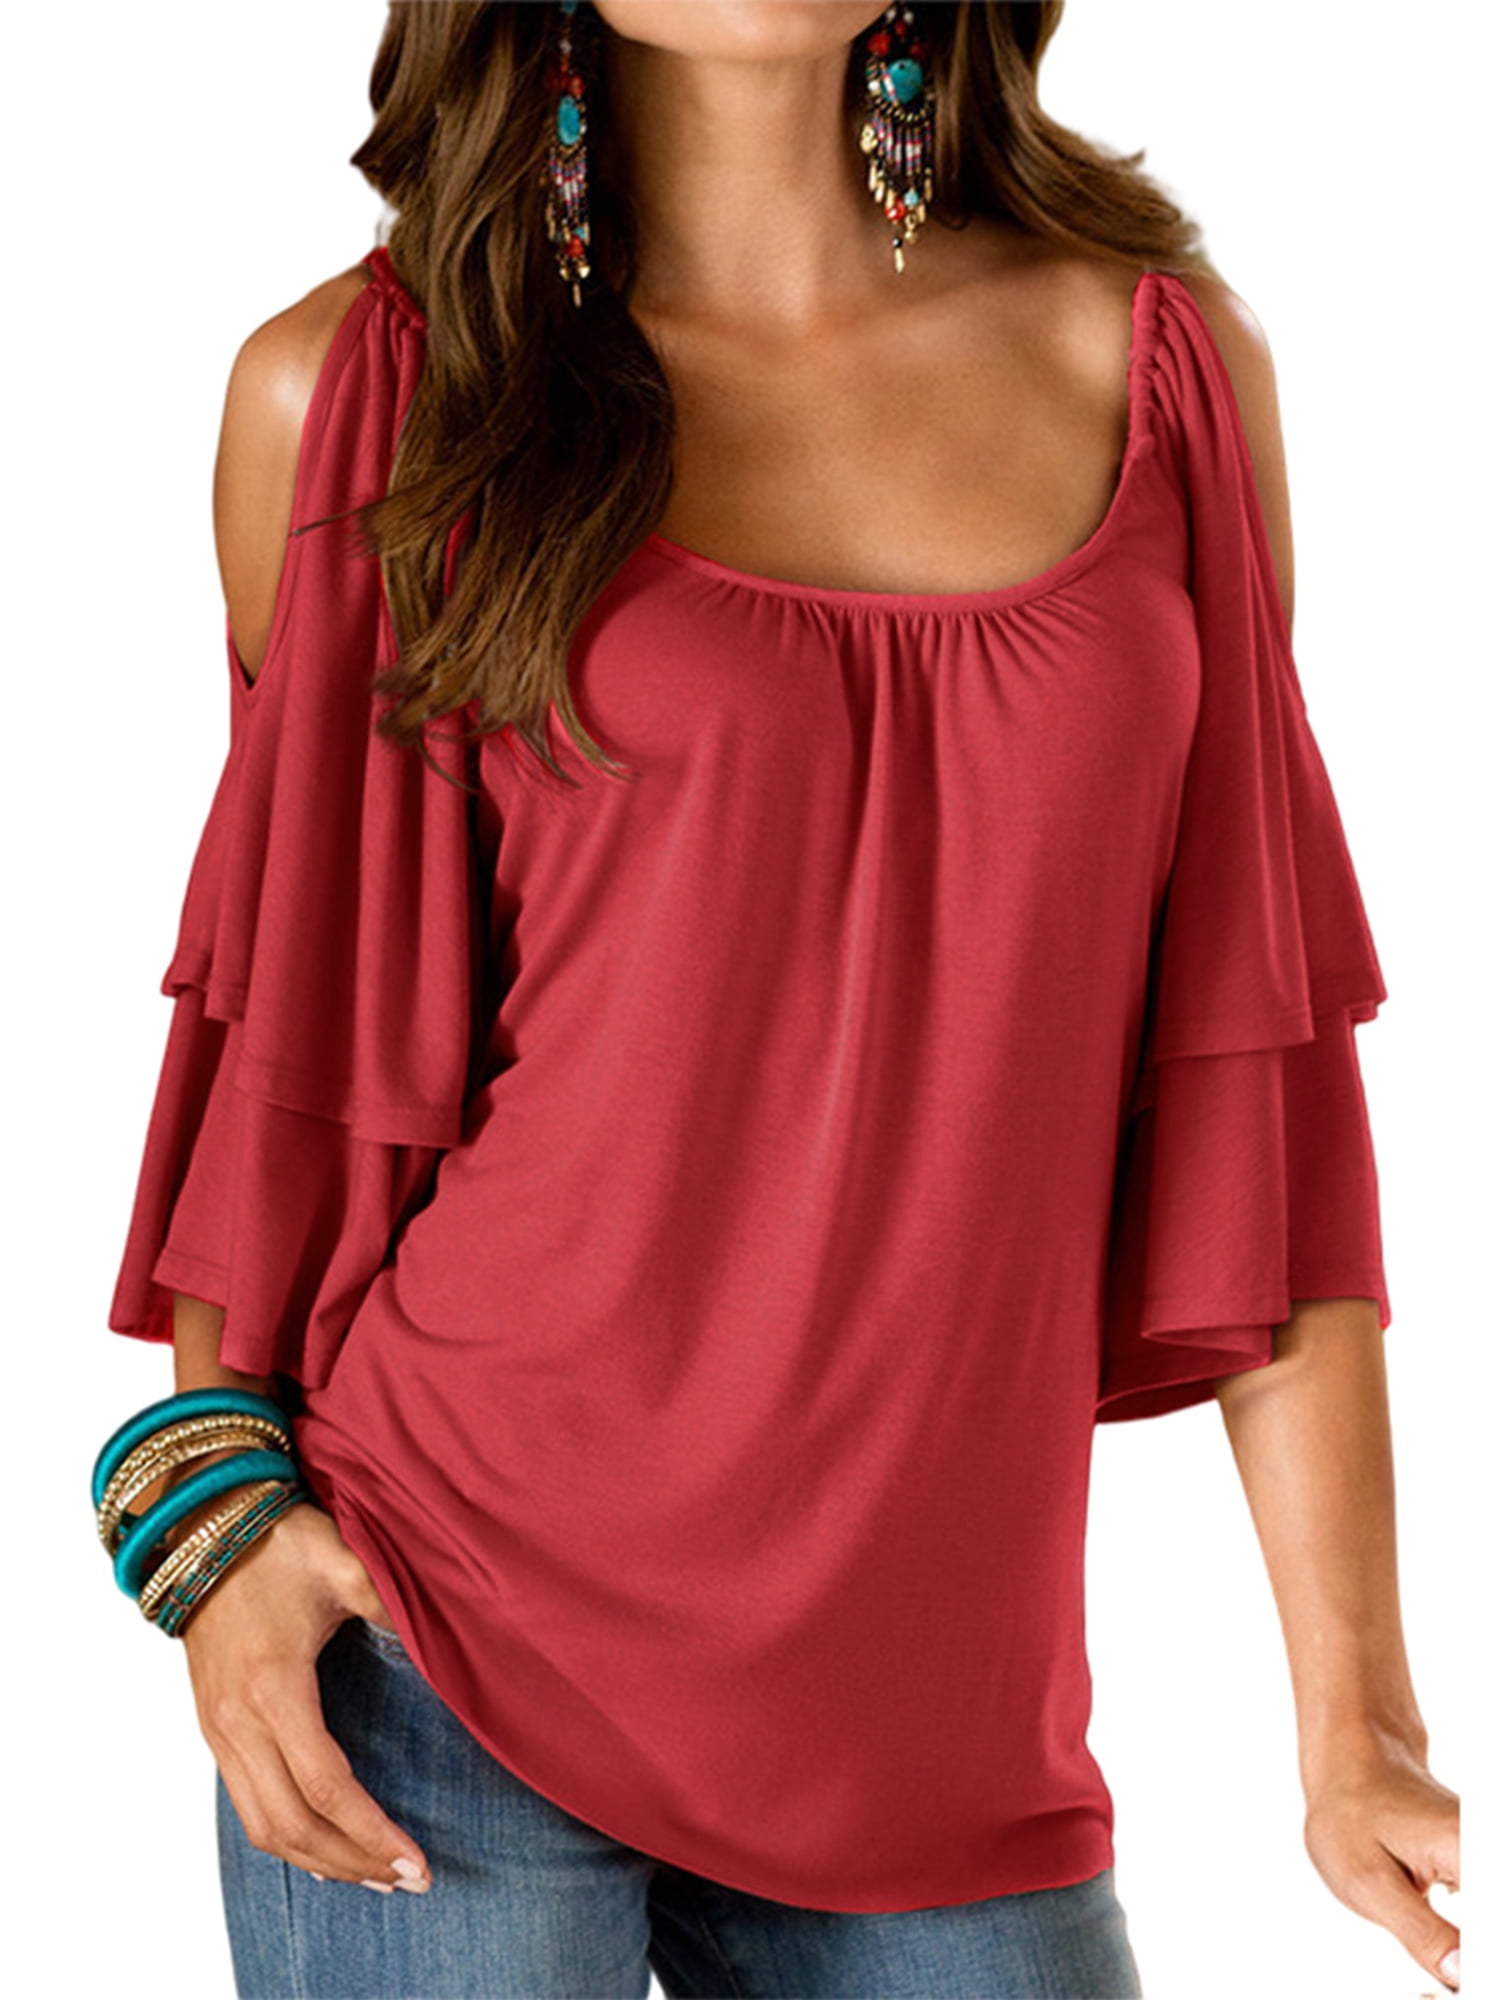 Casual Tunic Blouse Tops For Women Ladies Ruffled Pleated Cold